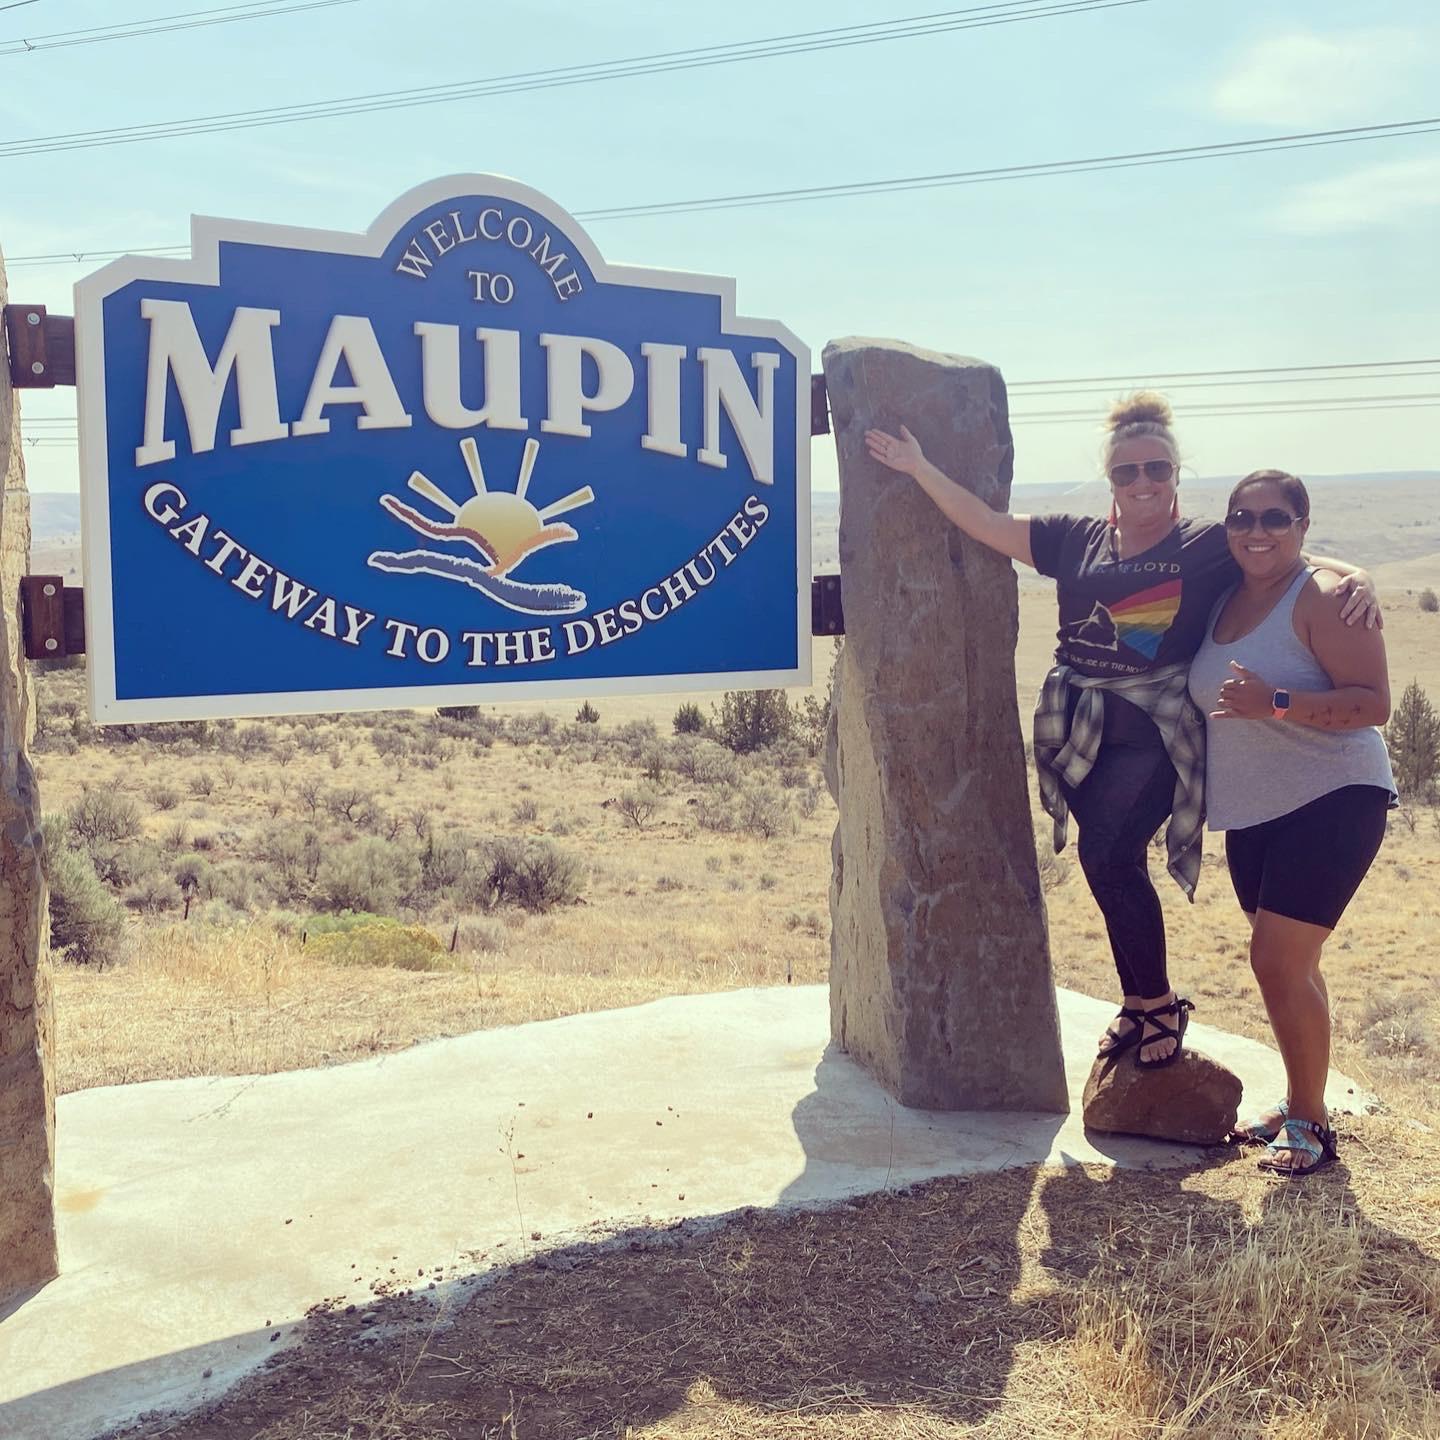 First stop was to Maupin Oregon where Lindsey's BFF Rachelle lives.